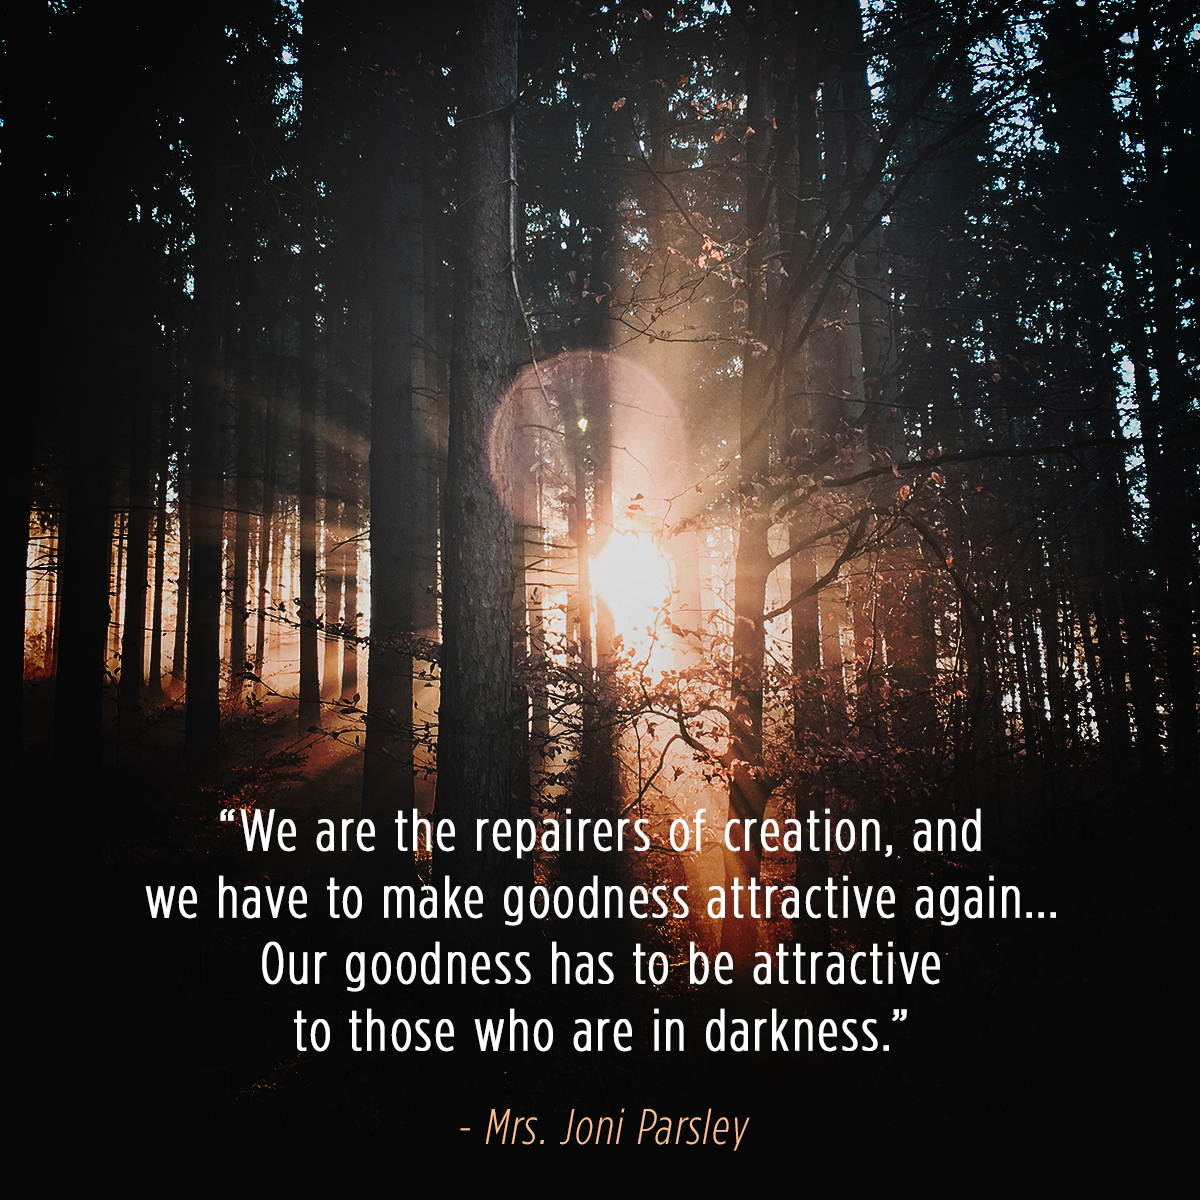 “We are the repairers of creation, and we have to make goodness attractive again …Our goodness has to be attractive to those who are in darkness.” – Mrs. Joni Parsley